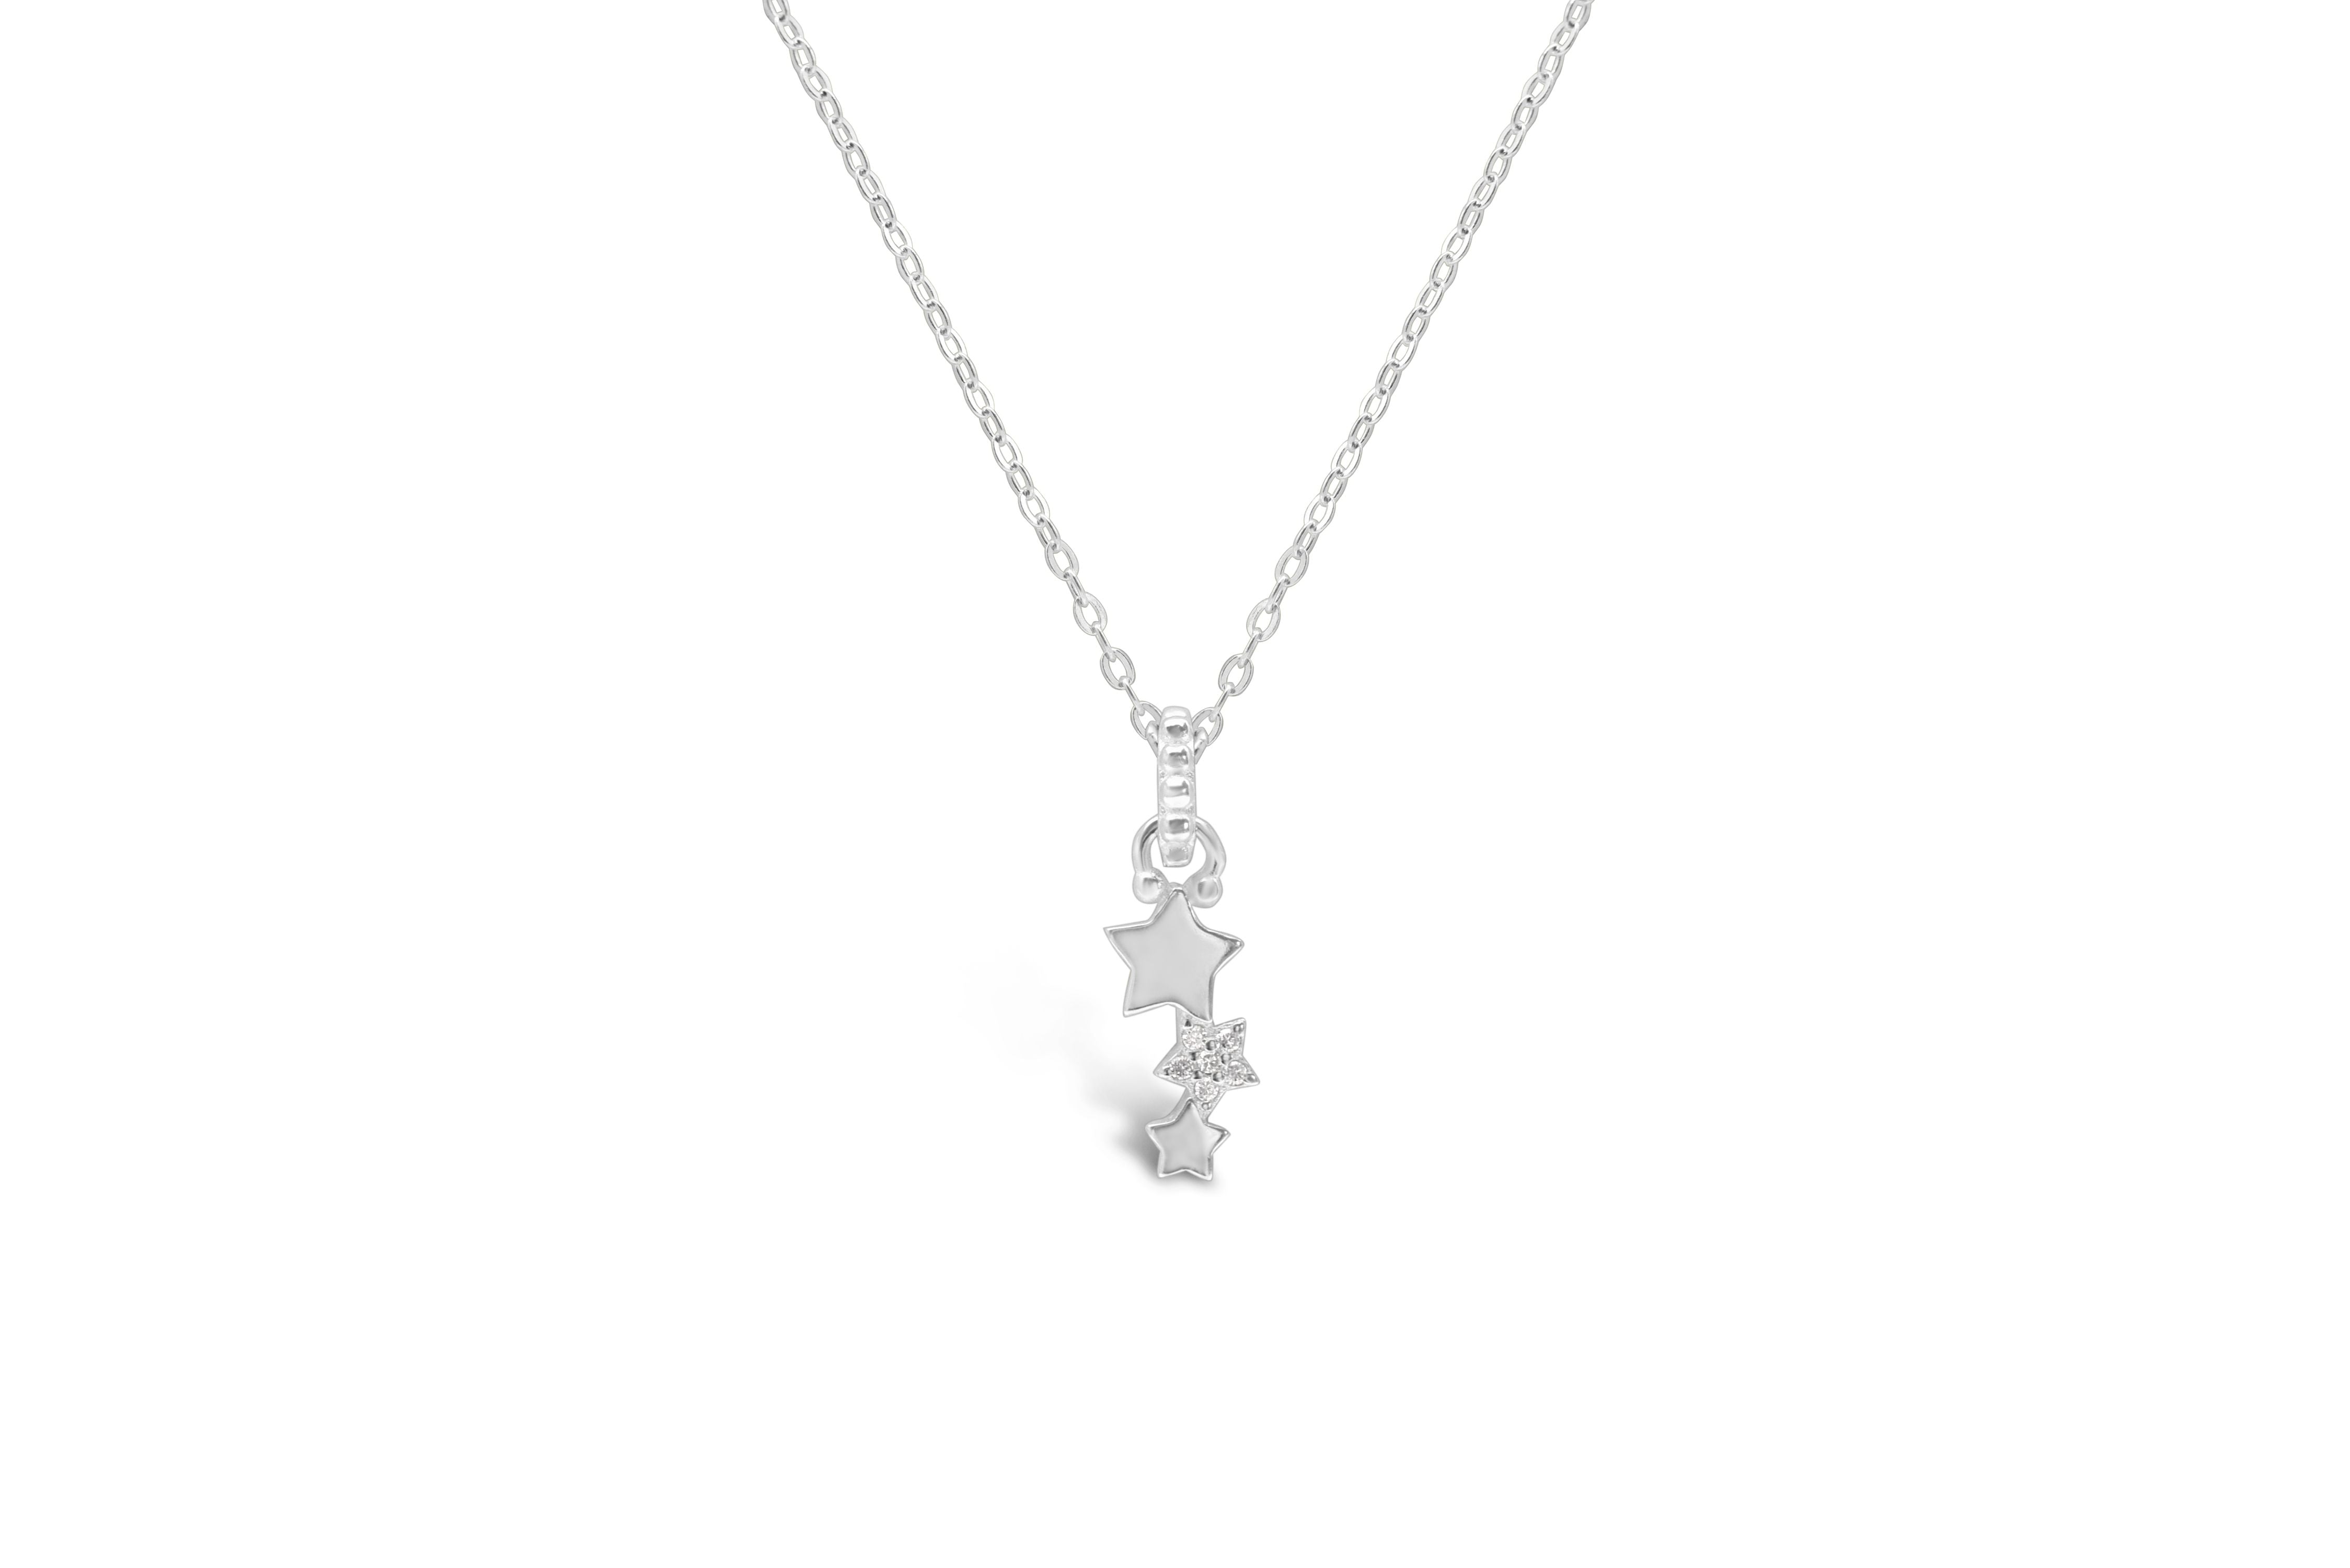 Stia Girl- A Little Bit of Charm Necklaces